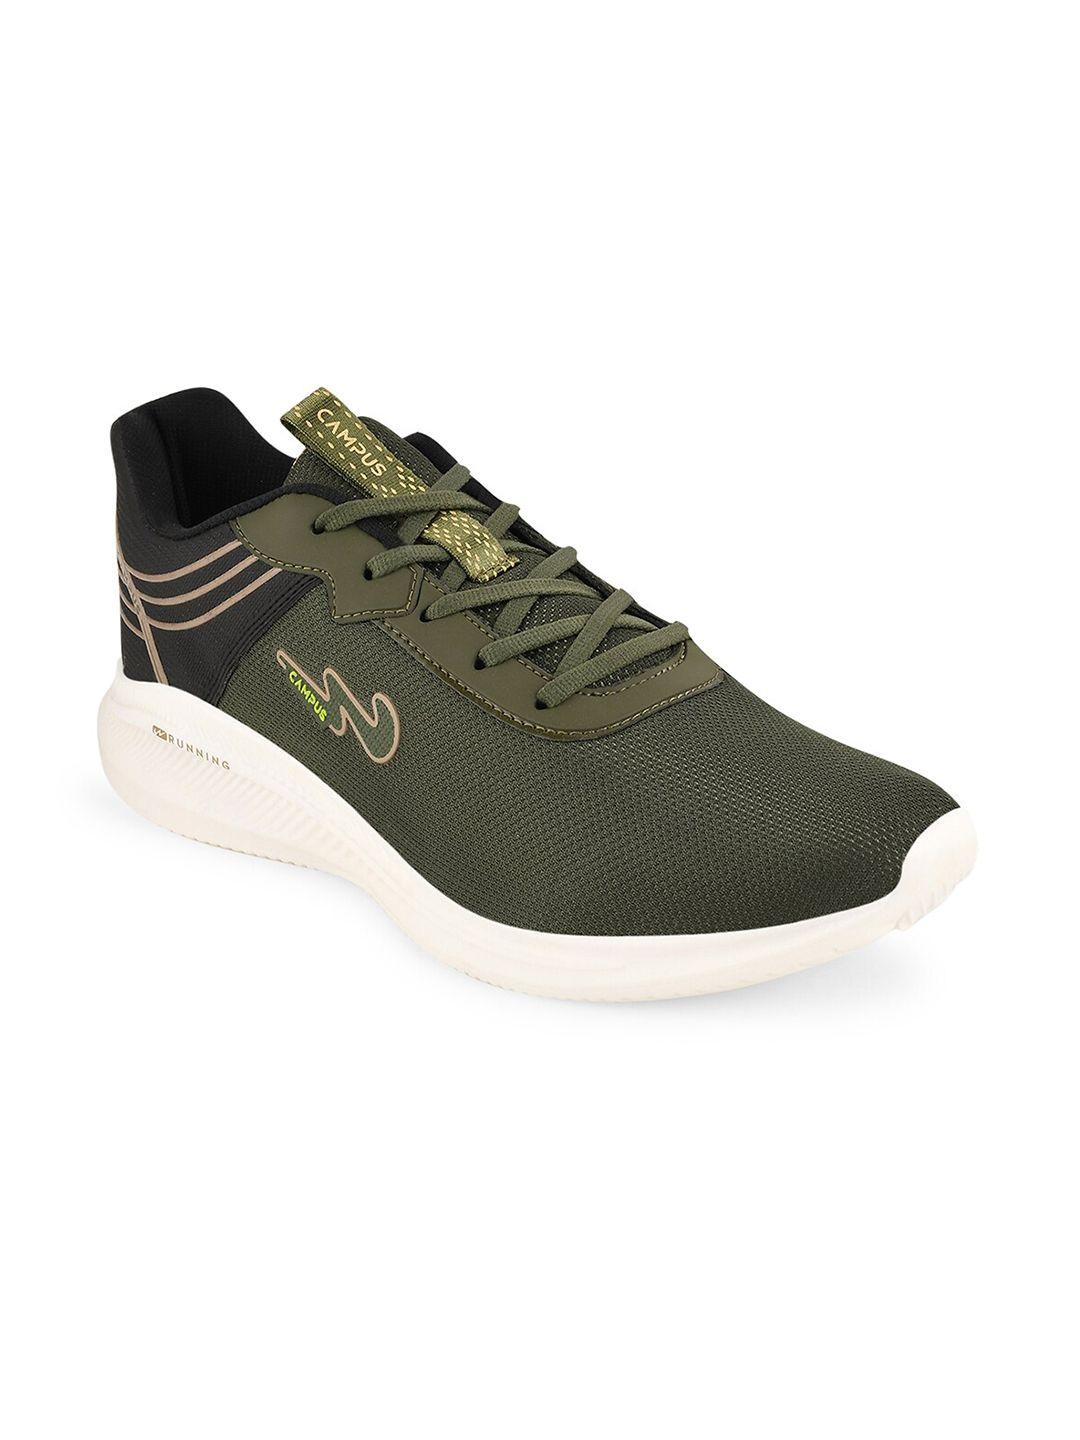 campus men olive green mesh running shoes